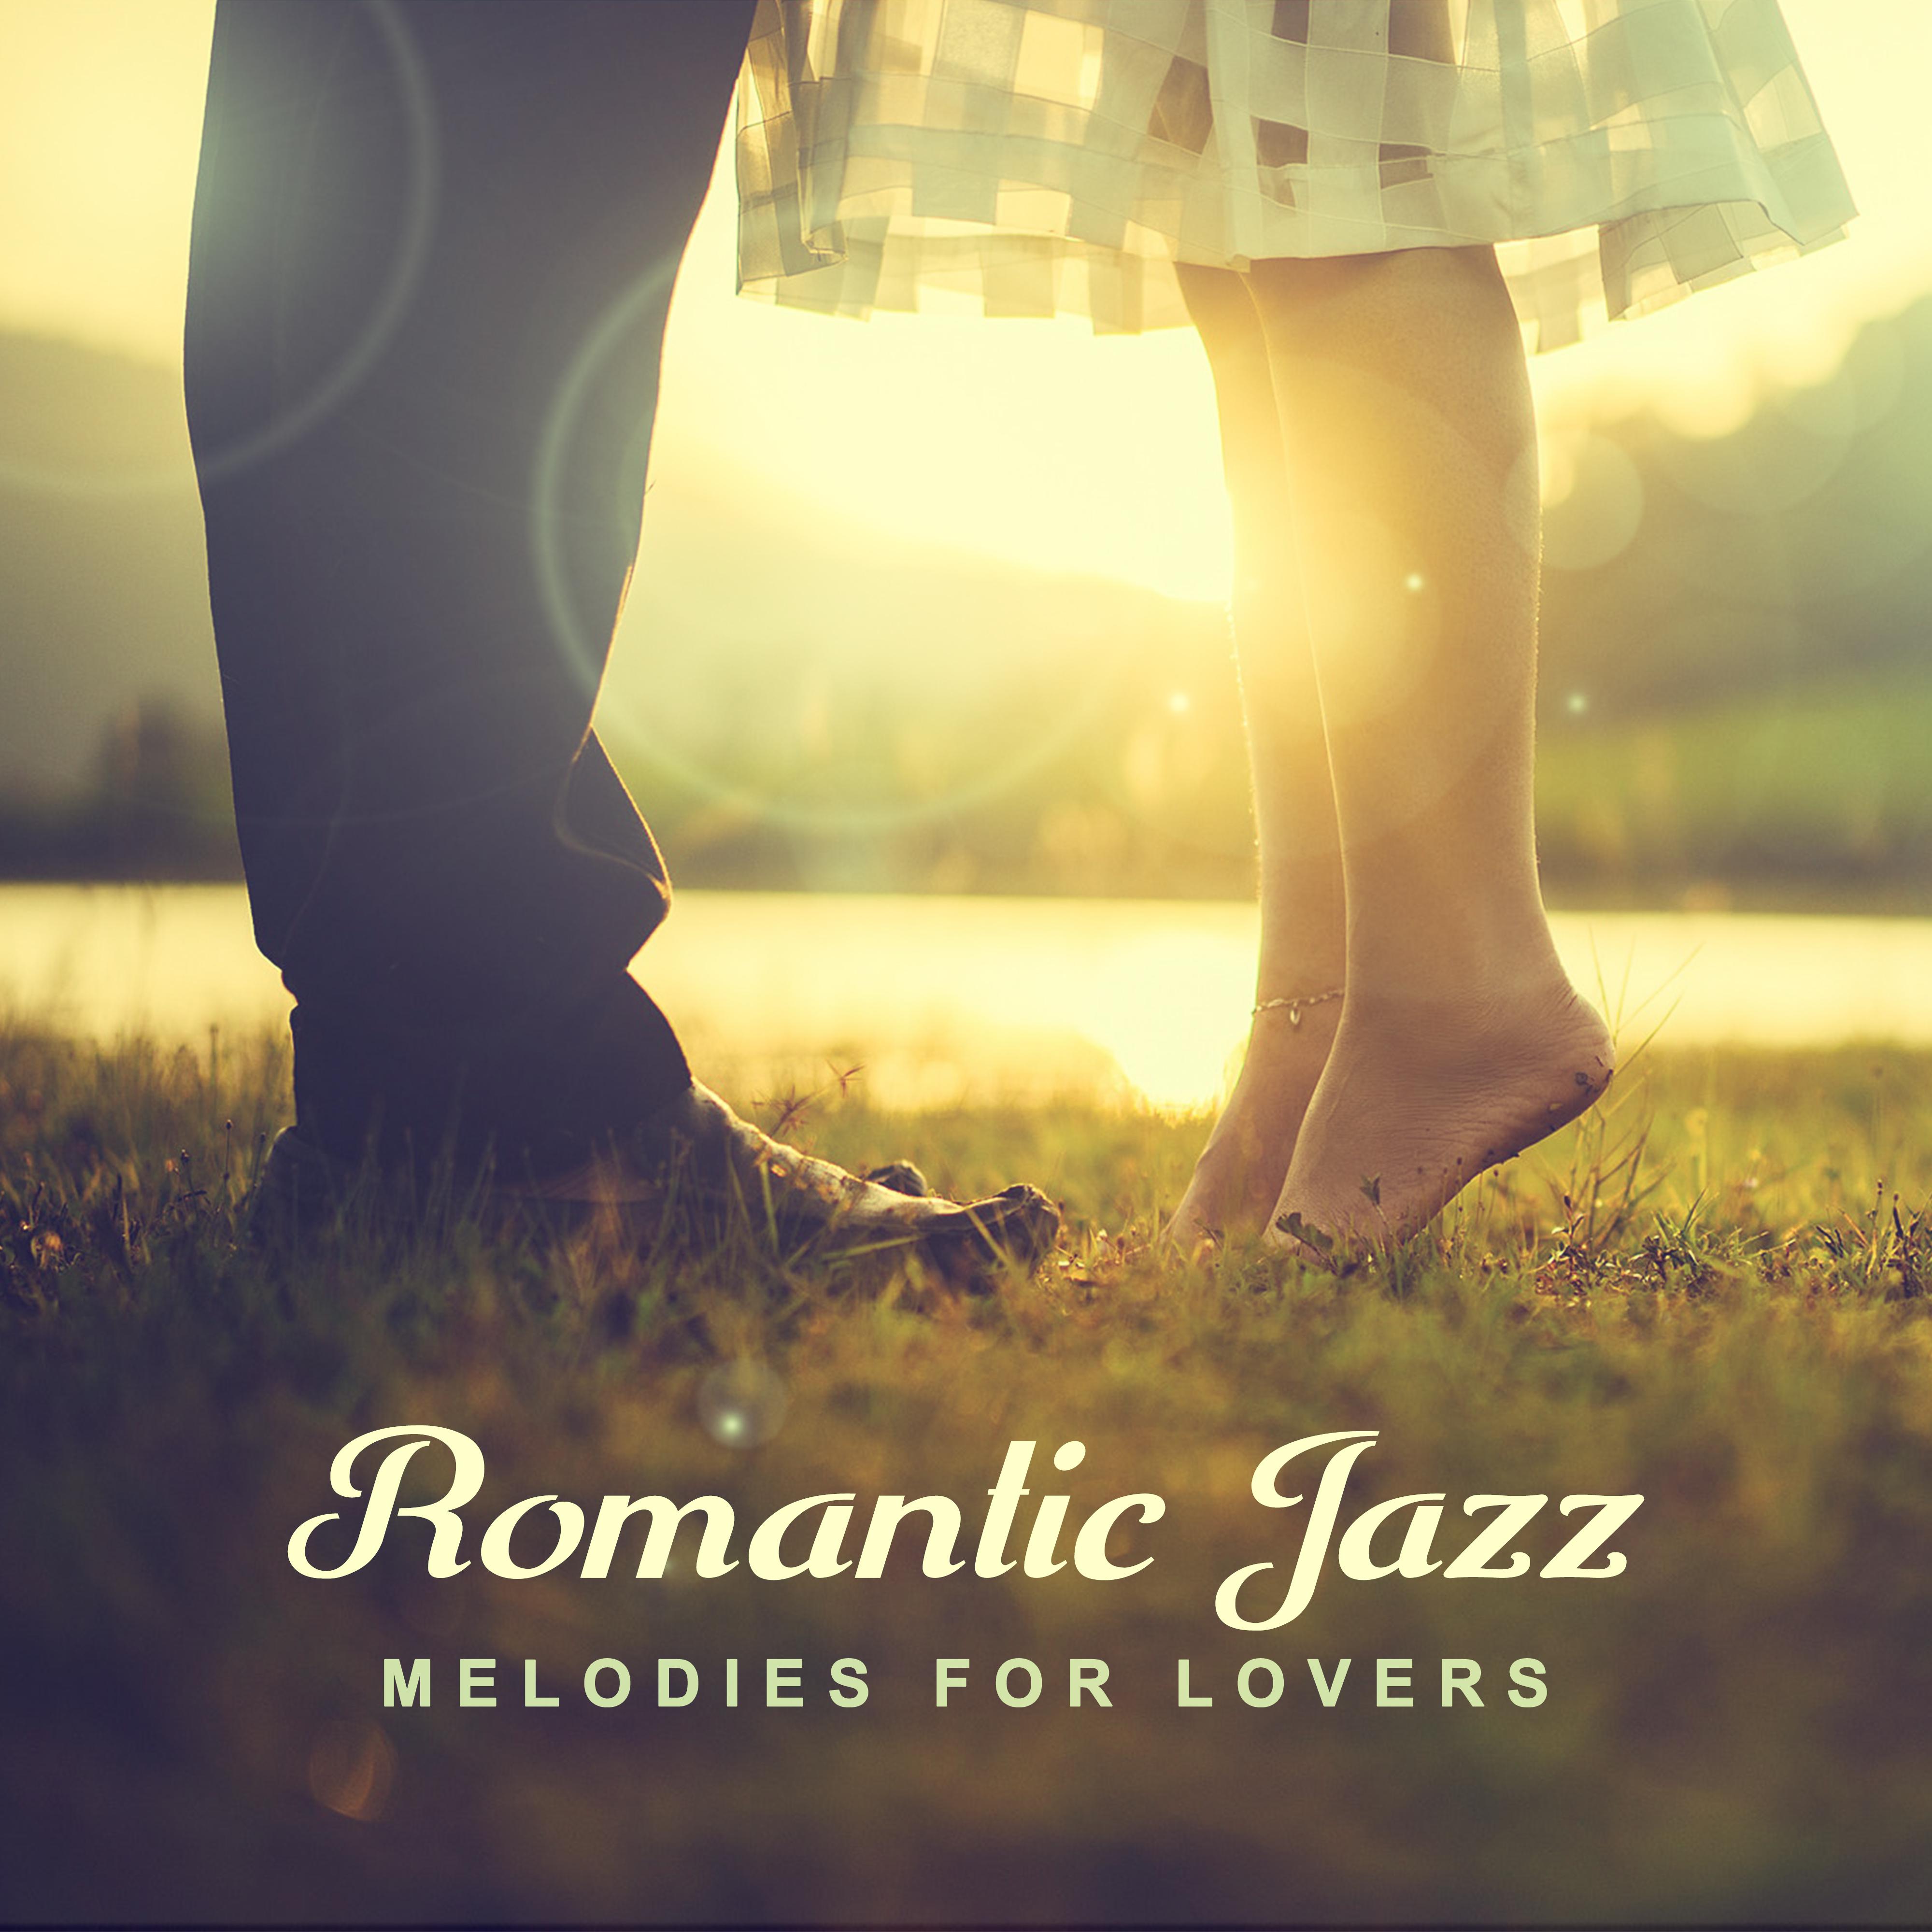 Romantic Jazz Melodies for Lovers